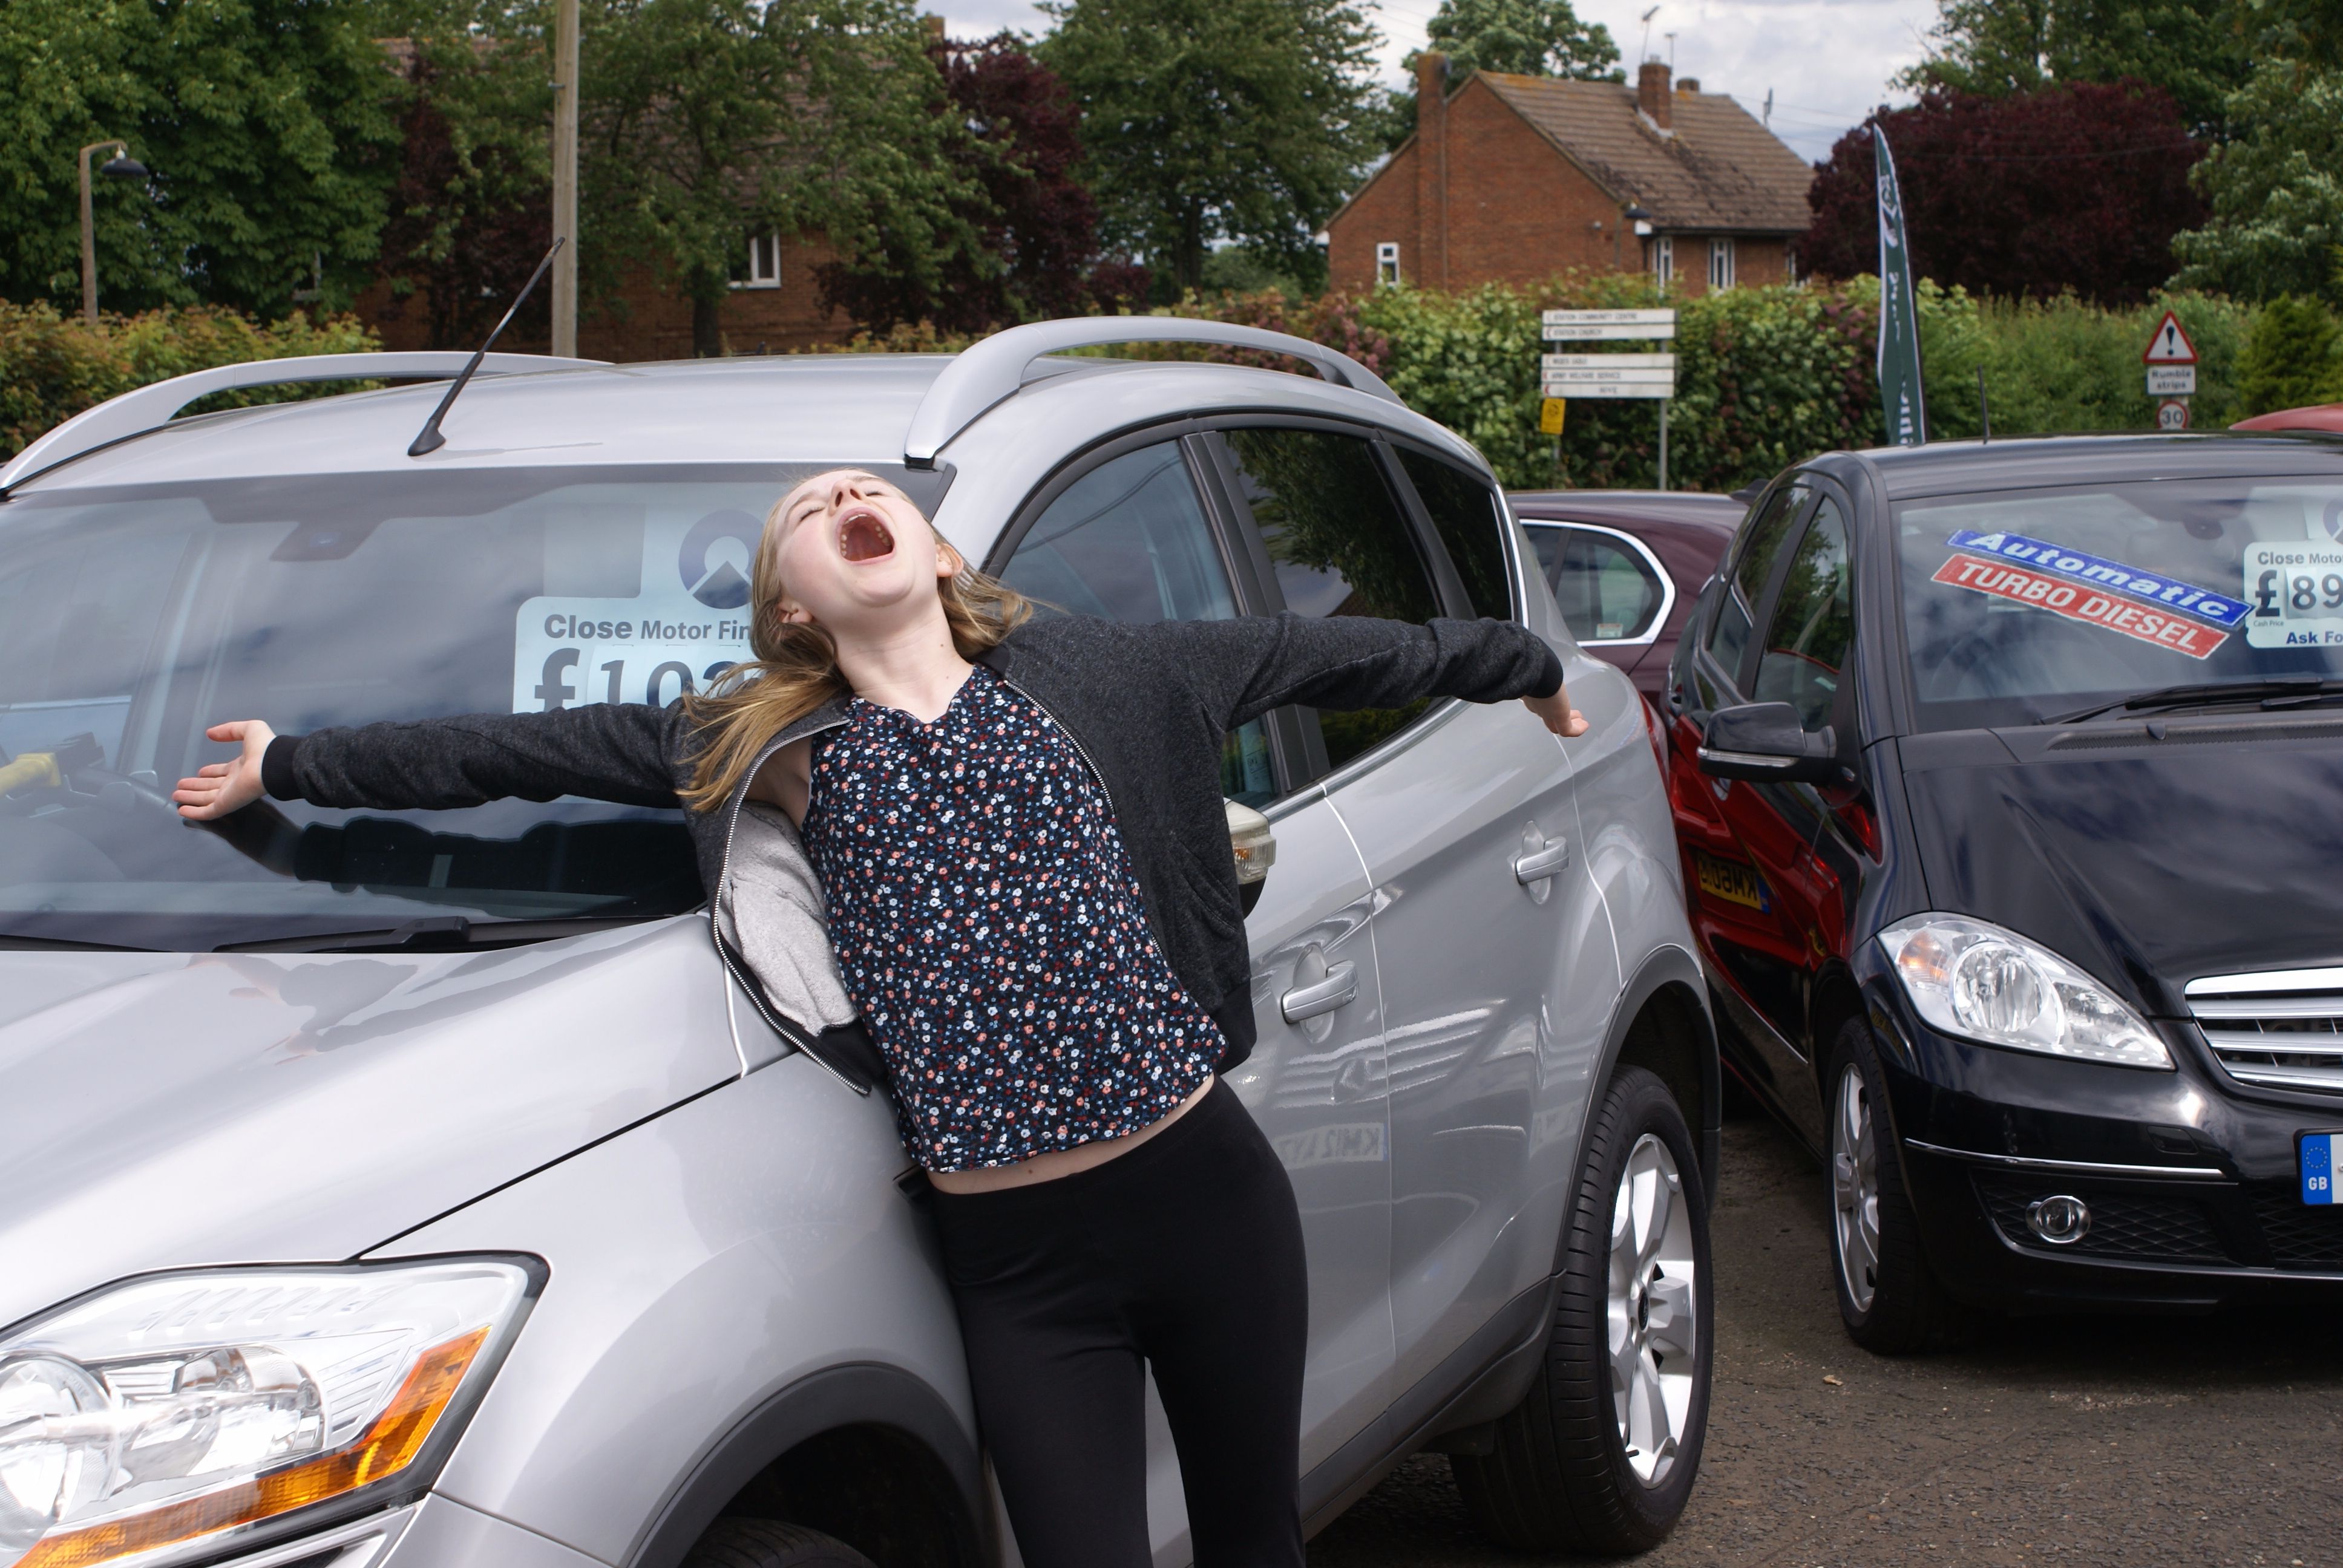 How many senses do you use when buying a used car?